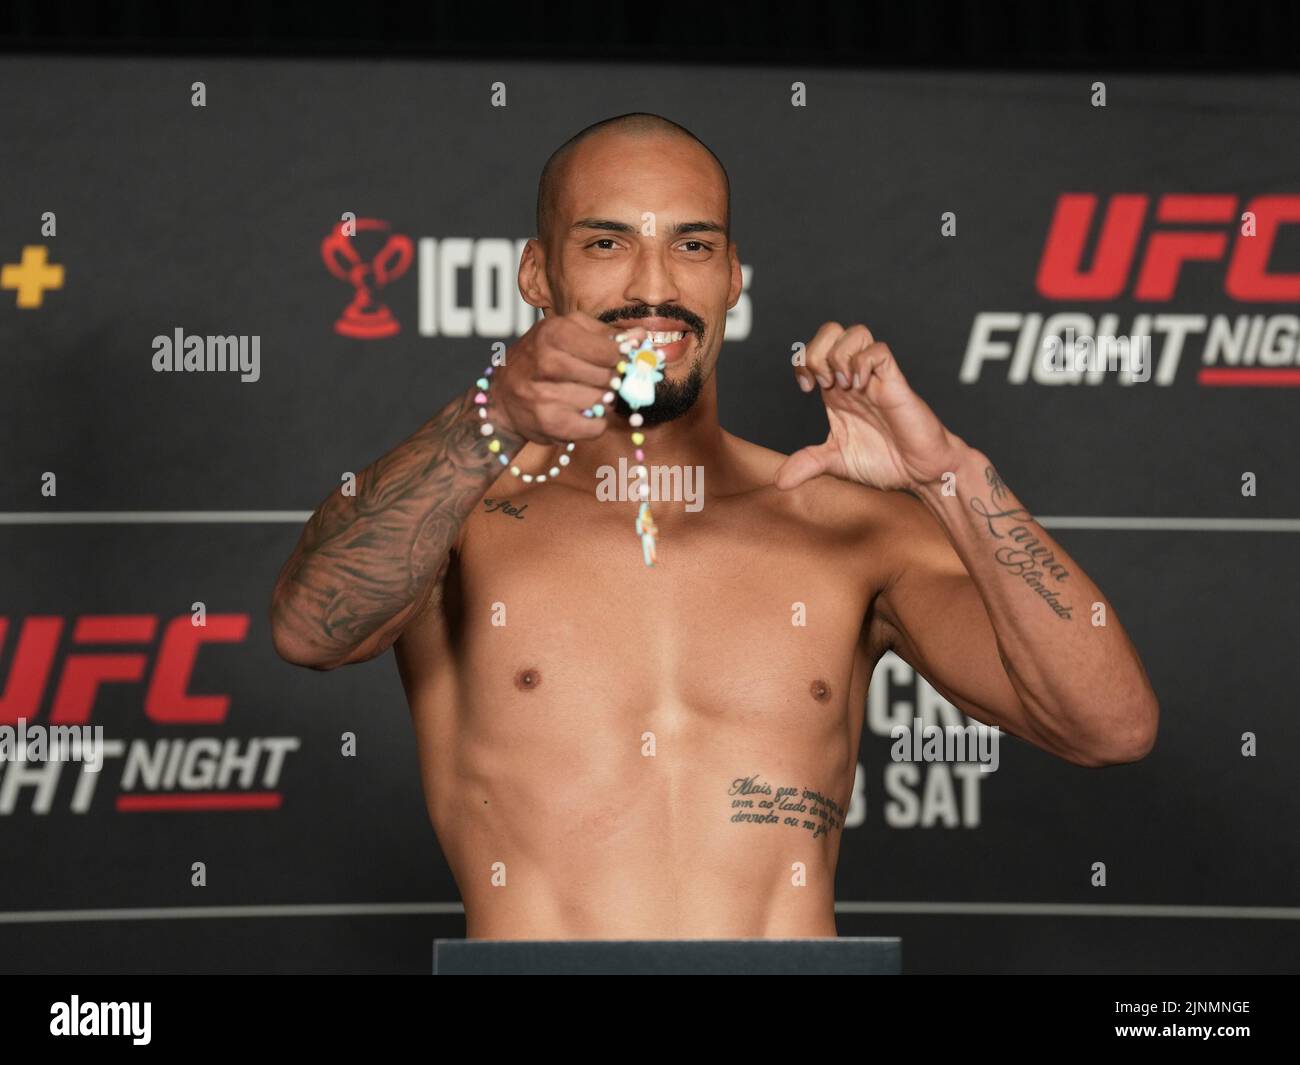 San Diego, USA. 12th Aug, 2022. SAN DIEGO, CA - August 12: Bruno Silva  steps on the scale for the official weigh-in at the Sheraton San Diego Hotel & Marina for UFC Fight Night - Vera vs Cruz : Official Weigh-in on August 12, 2022 in SAN DIEGO, United States. (Photo by Louis Grasse/PxImages) Credit: Px Images/Alamy Live News Stock Photo